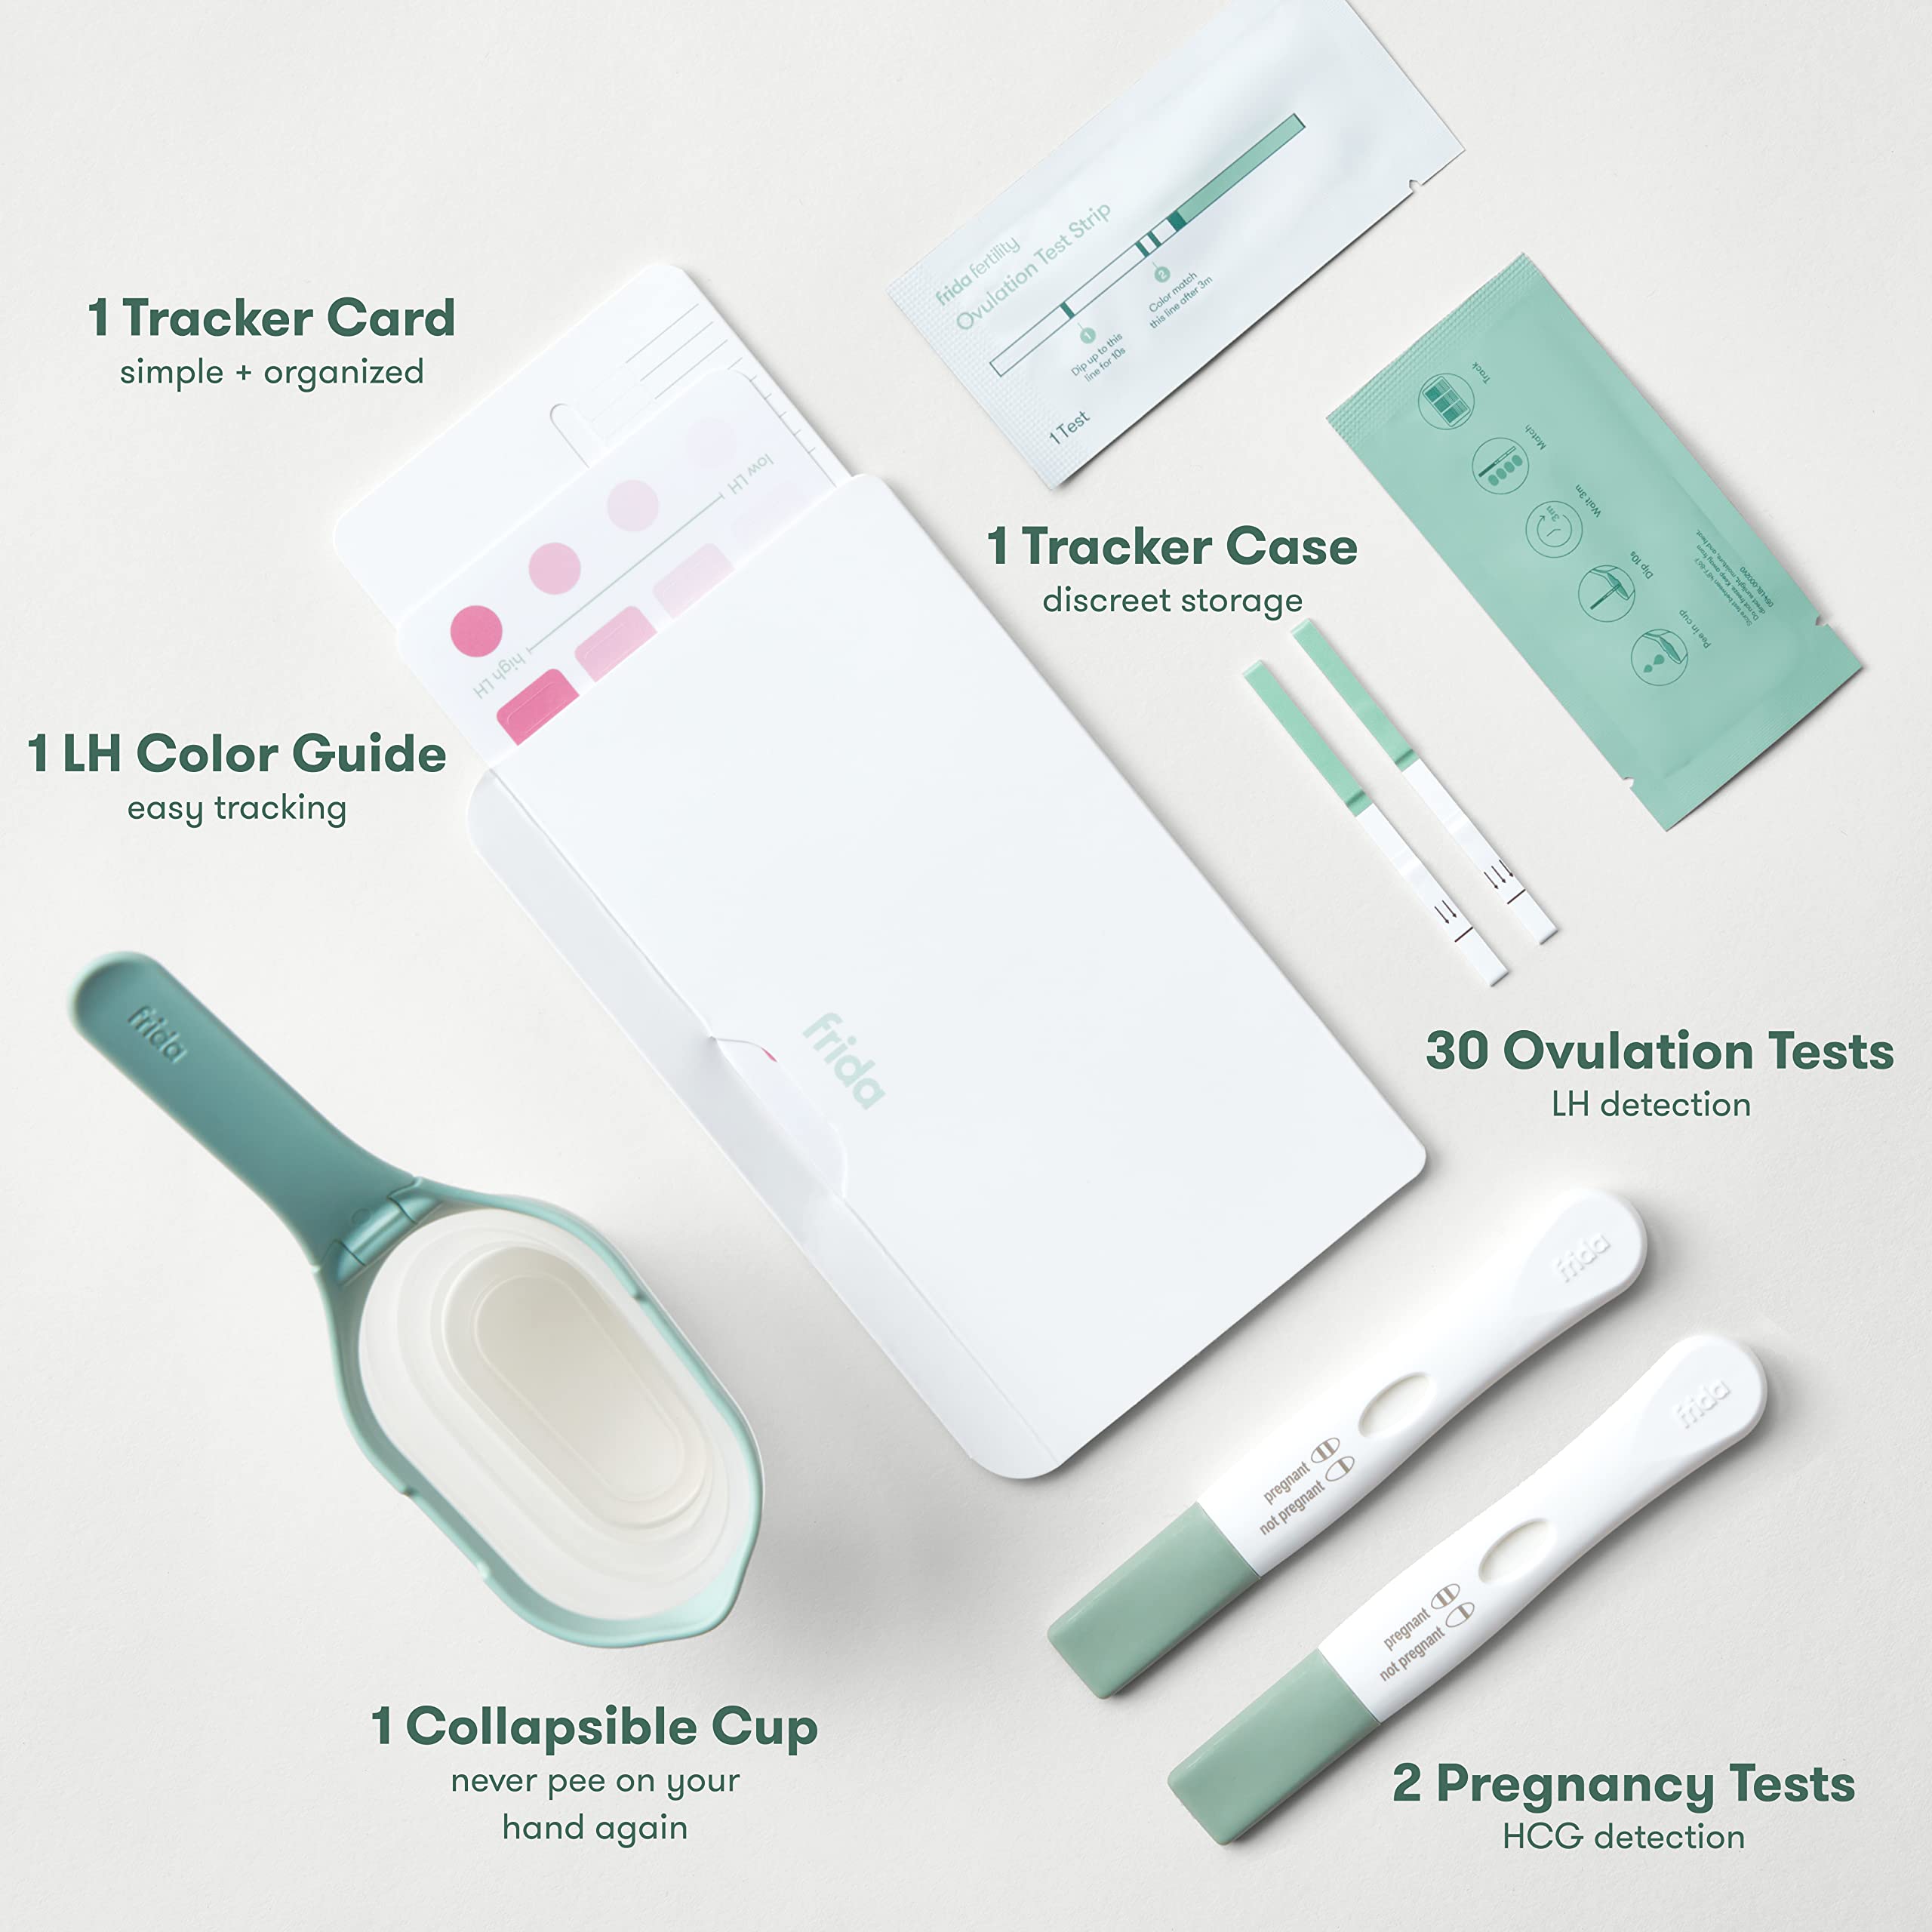 Frida Fertility Ovulation and Pregnancy Test + Track Set - Accurate, Early Detection - Find Your 48 Hour Baby Making Window + Test 6 Days Before Missed Period